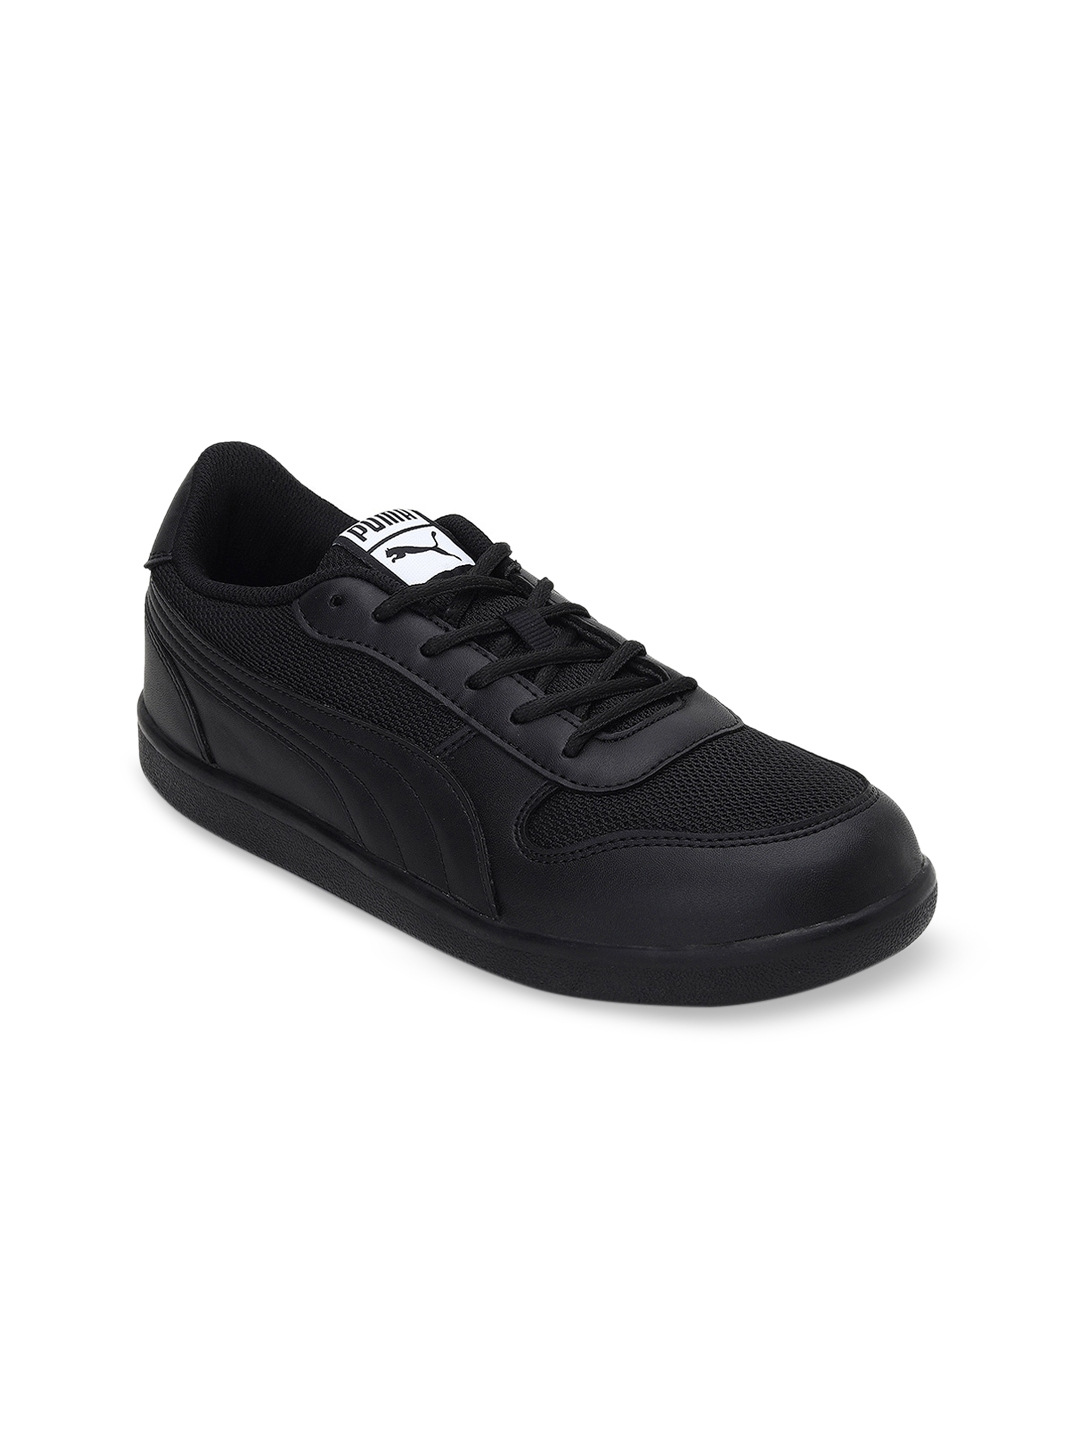 Buy Puma Unisex Black Solid Kent 2.0 Sneakers - Casual Shoes for Unisex ...